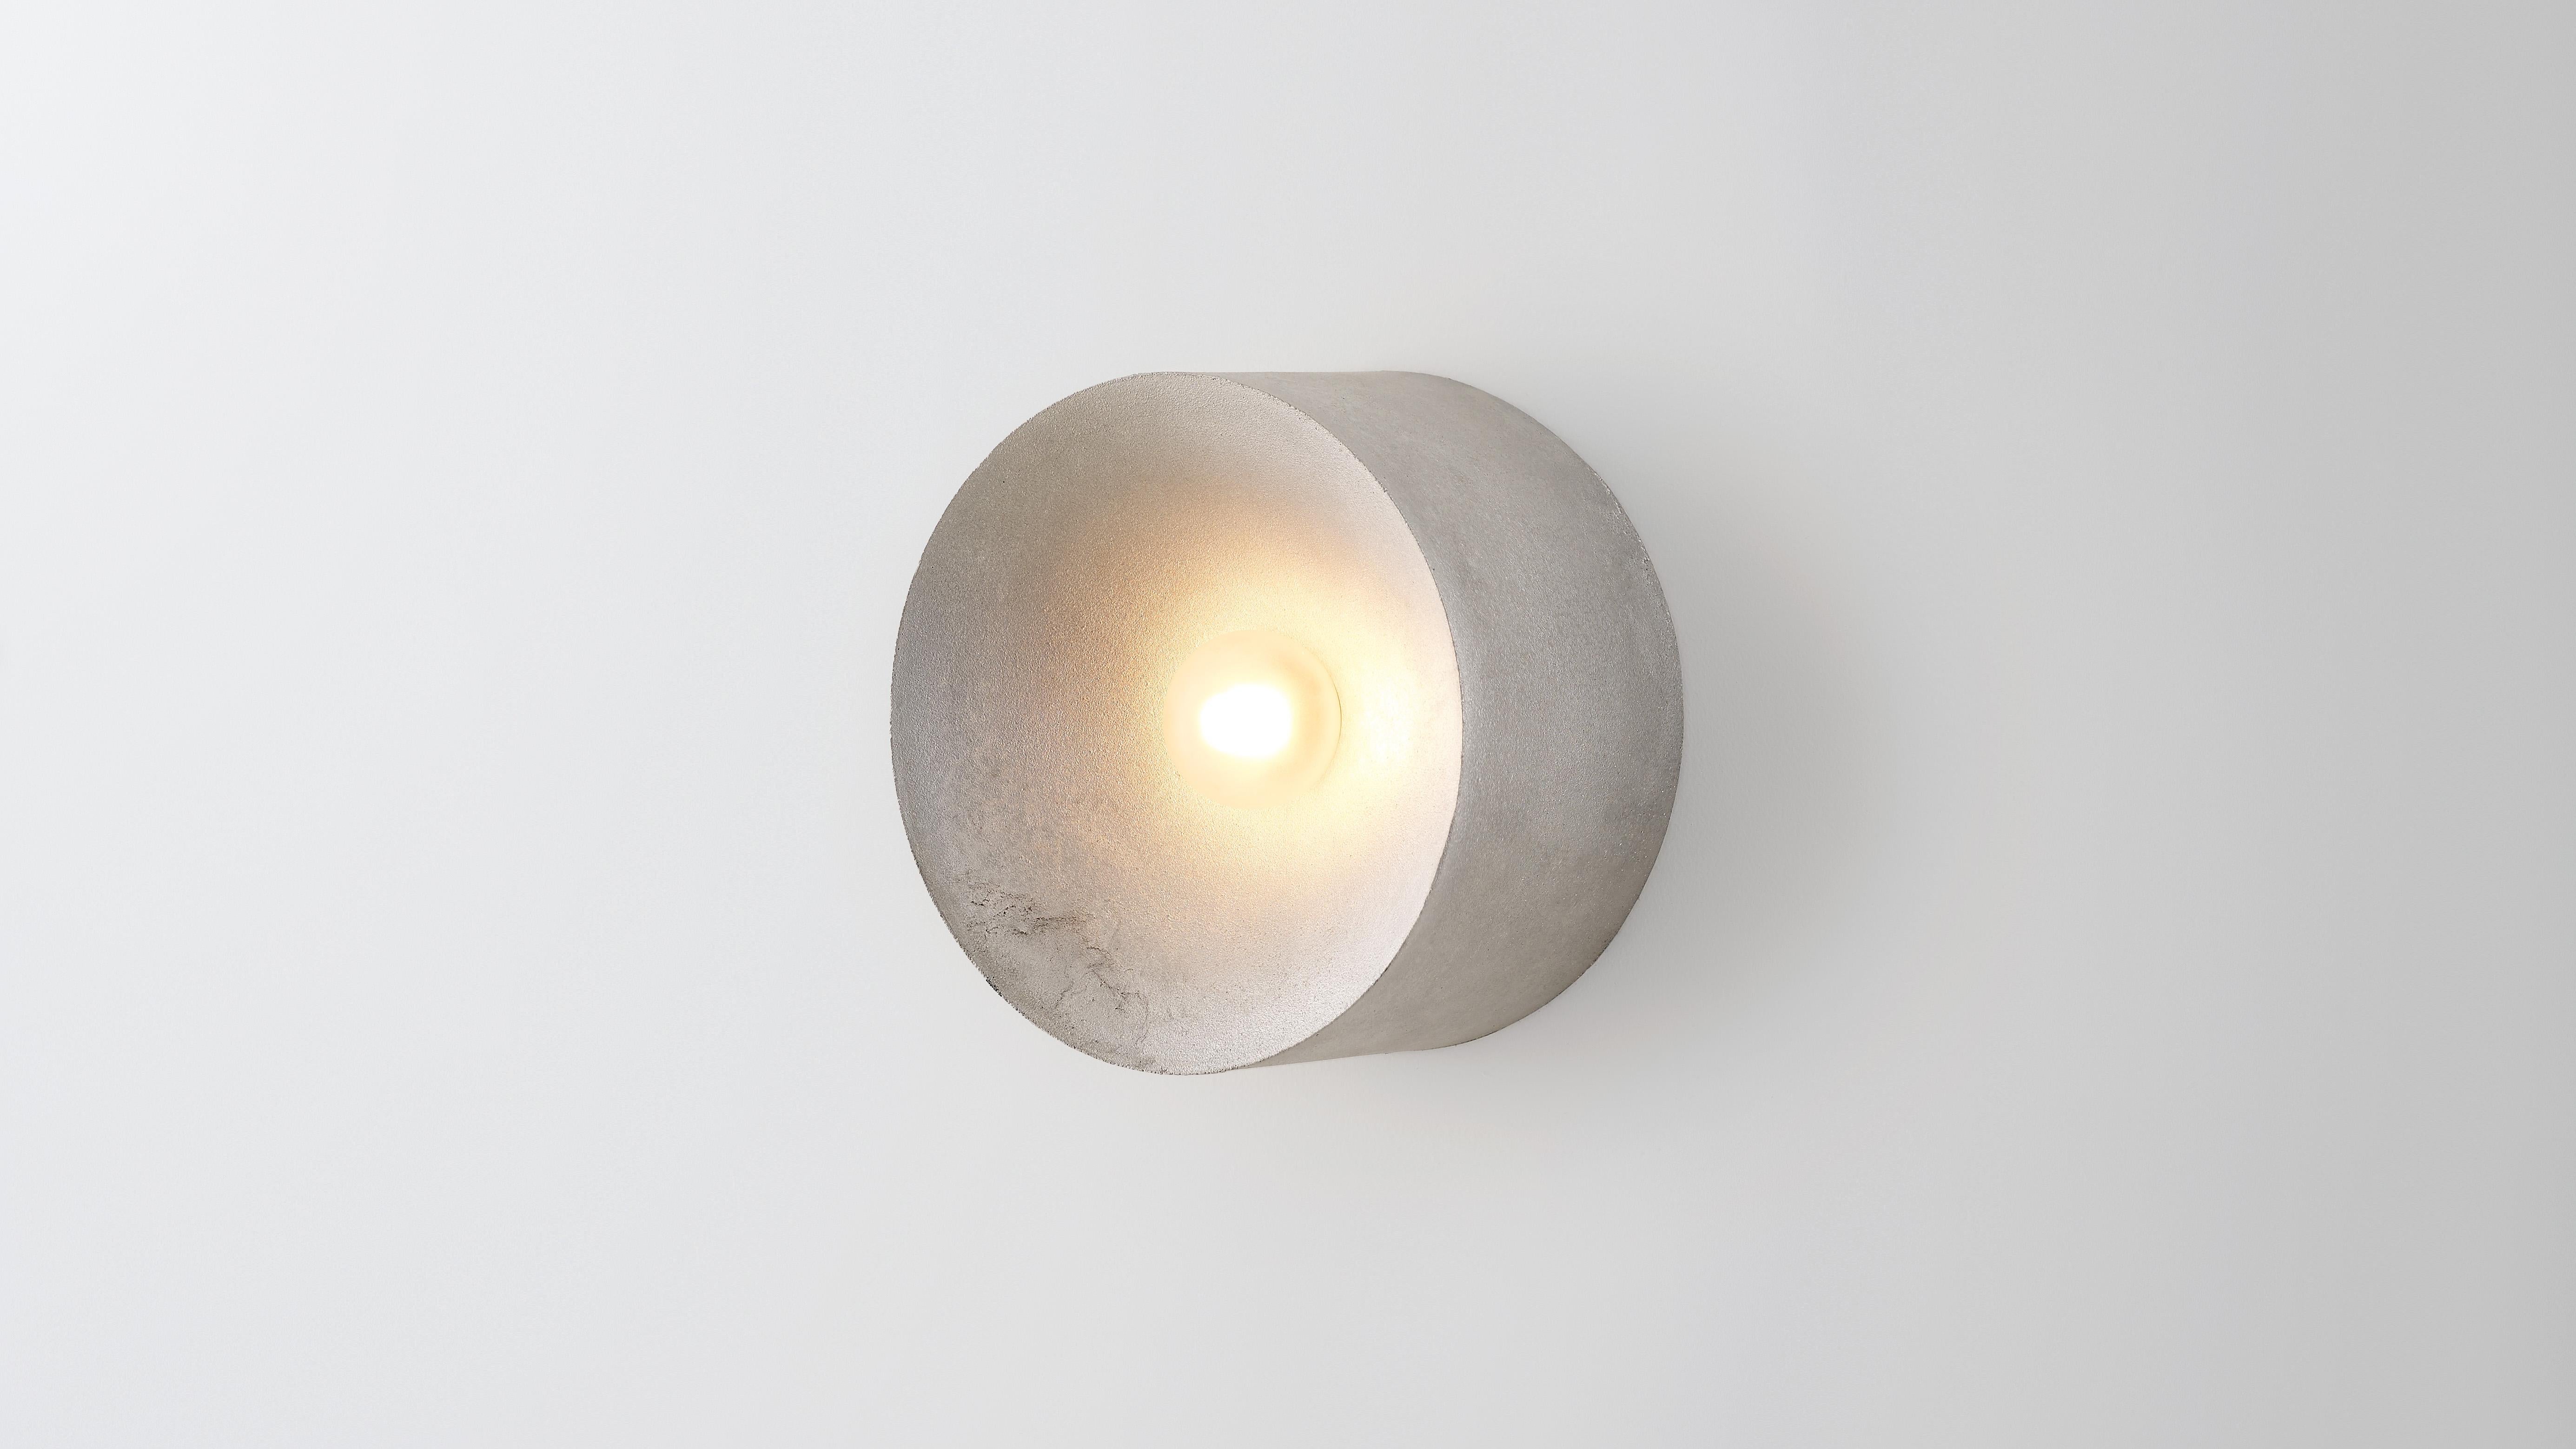 Anton in aluminum by Volker Haug
Anton series
Dimensions: Ø 18 x D 10 cm.
Materials: Cast aluminum
Finish: Raw 
Lamp: G9 LED (240V / 120V US). 12V option available
Glass bulb: 4.5 cm Ø, frosted
Weight: 1.5kg

Form follows force. The Anton series